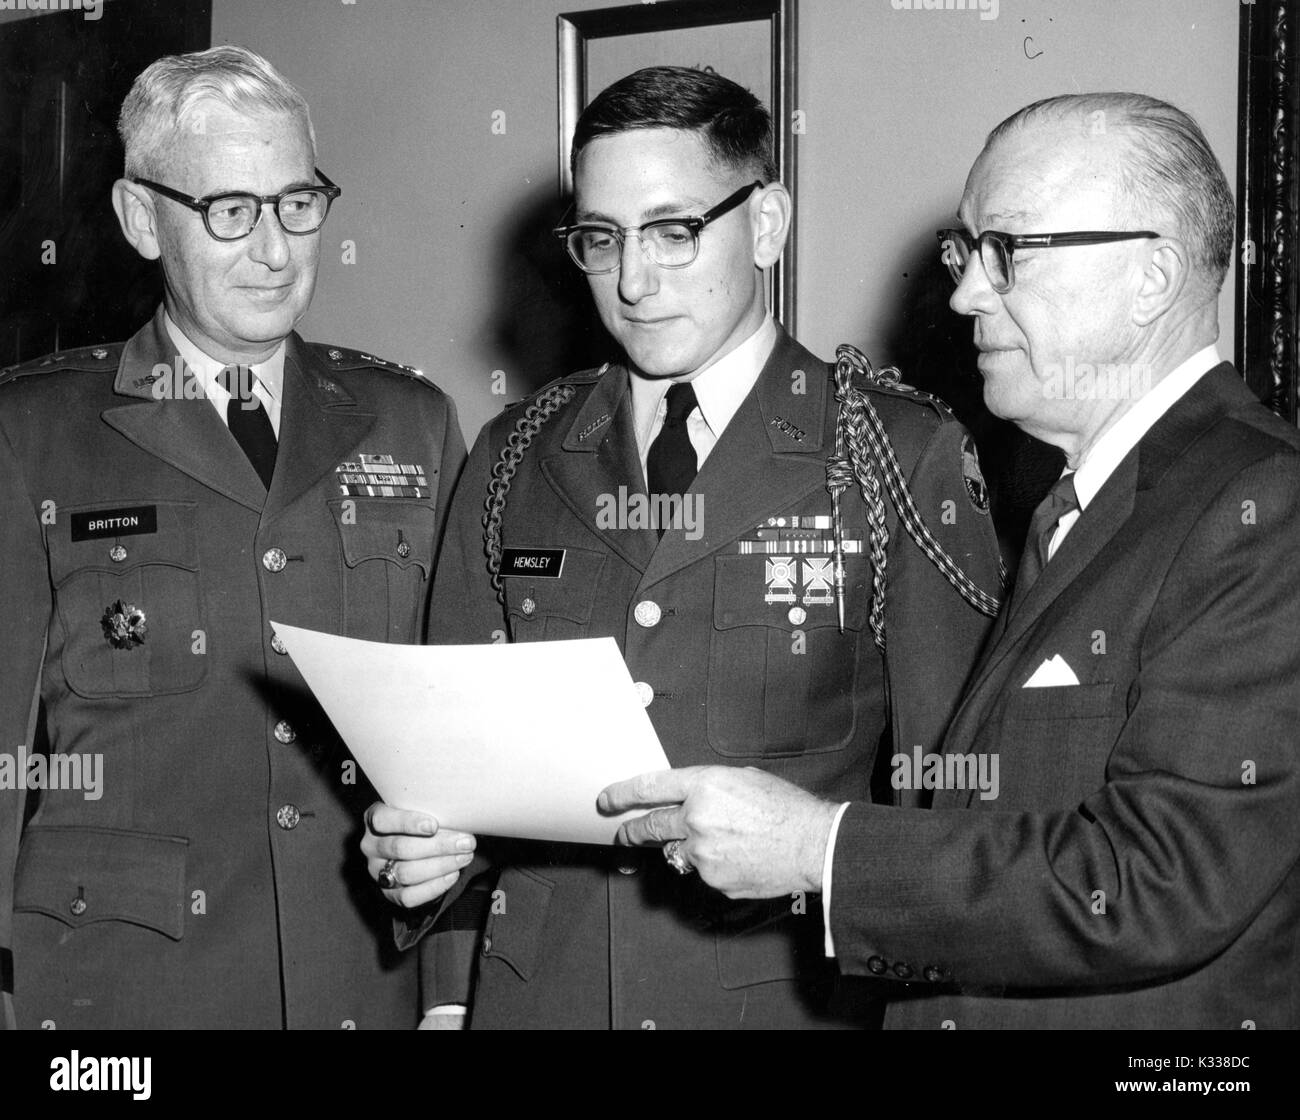 Milton Stover Eisenhower, President of Johns Hopkins University, stands to present the Distinguished Military Student Award to James Hemsley, wearing uniform and holding paper certificate, next to Major General Frank H Britten in uniform to his right, all three men wearing glasses, Baltimore, Maryland, 1965. Stock Photo